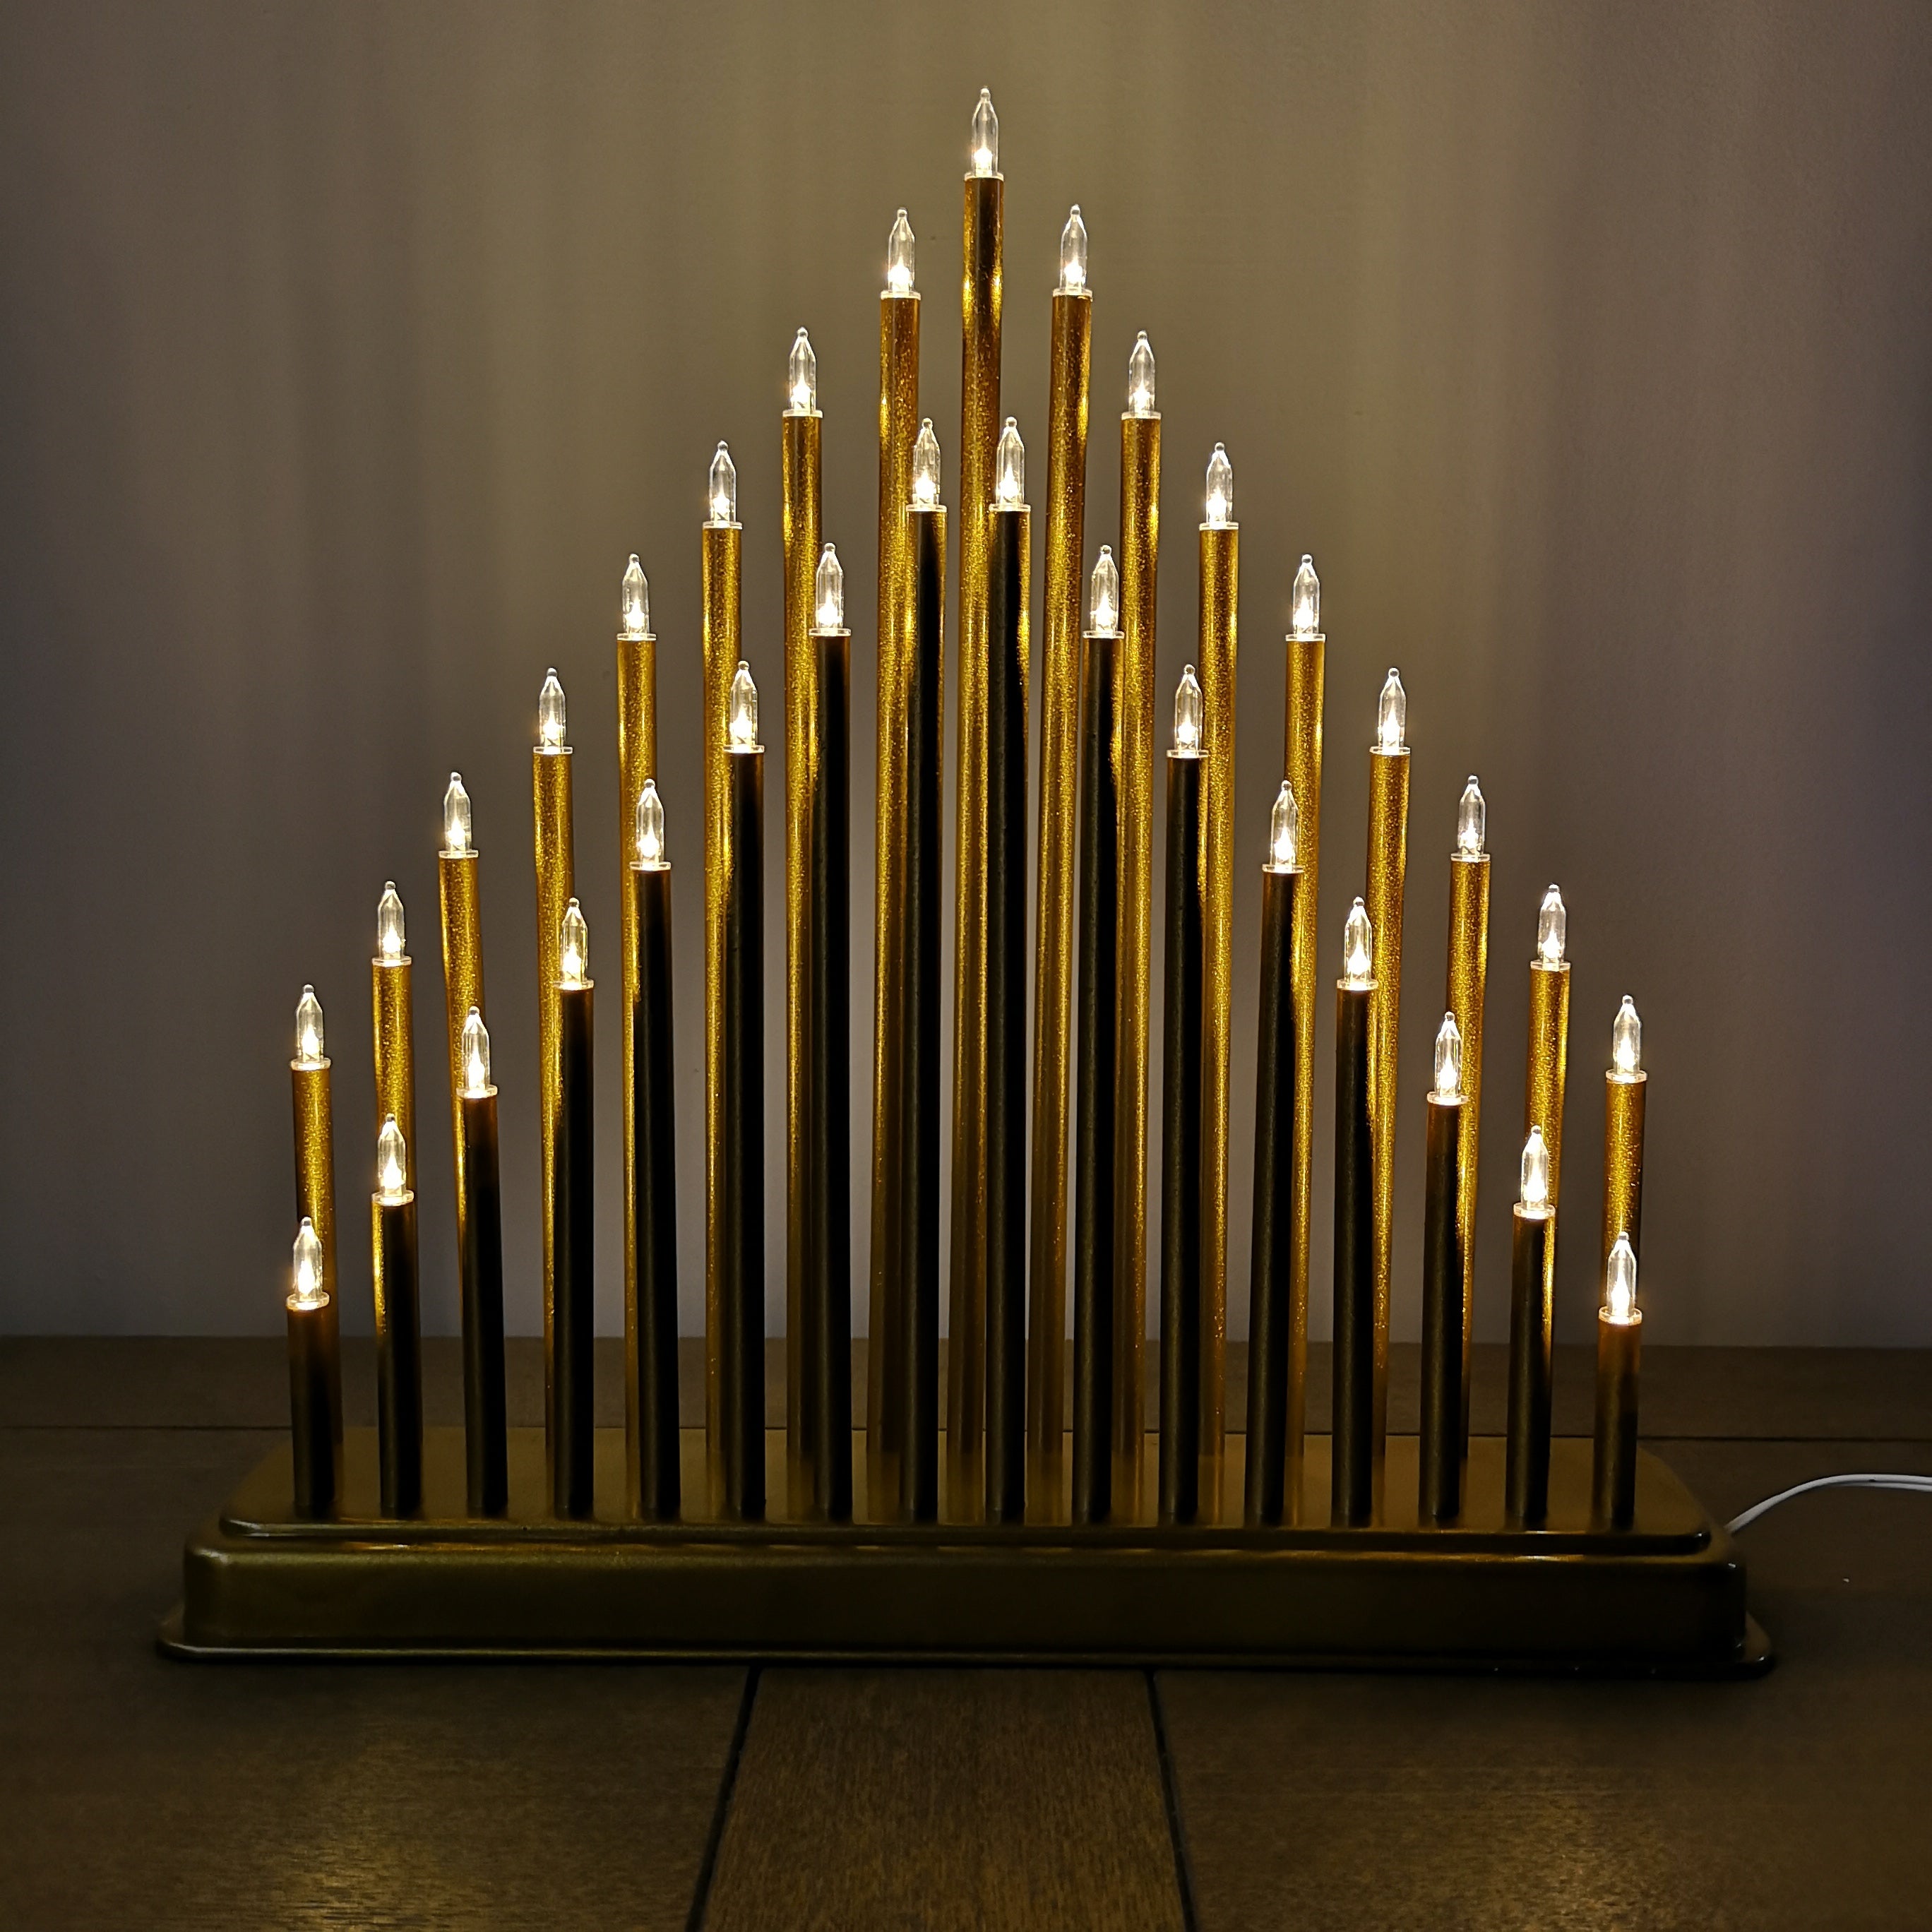 34cm Premier Christmas Candlebridge with 33 LEDs in Gold Mains Operated